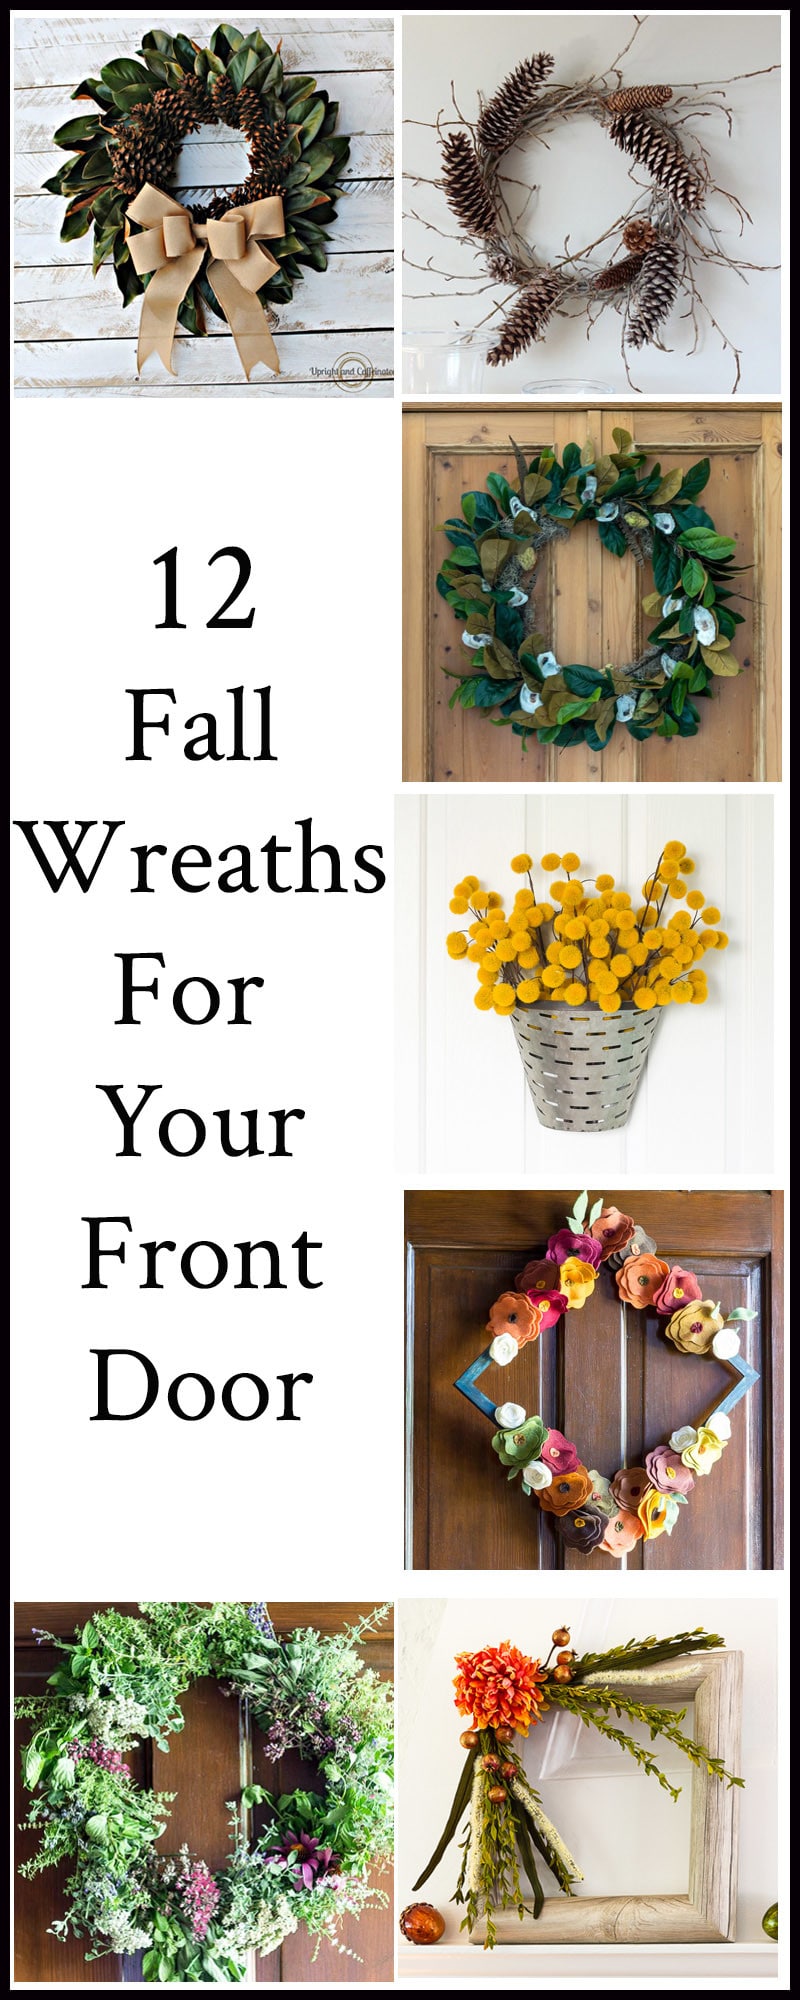 A round-up of 12 beautiful fall wreaths that you can make yourself. Links to each wreath where you can get the how-to's to diy your own wreath.